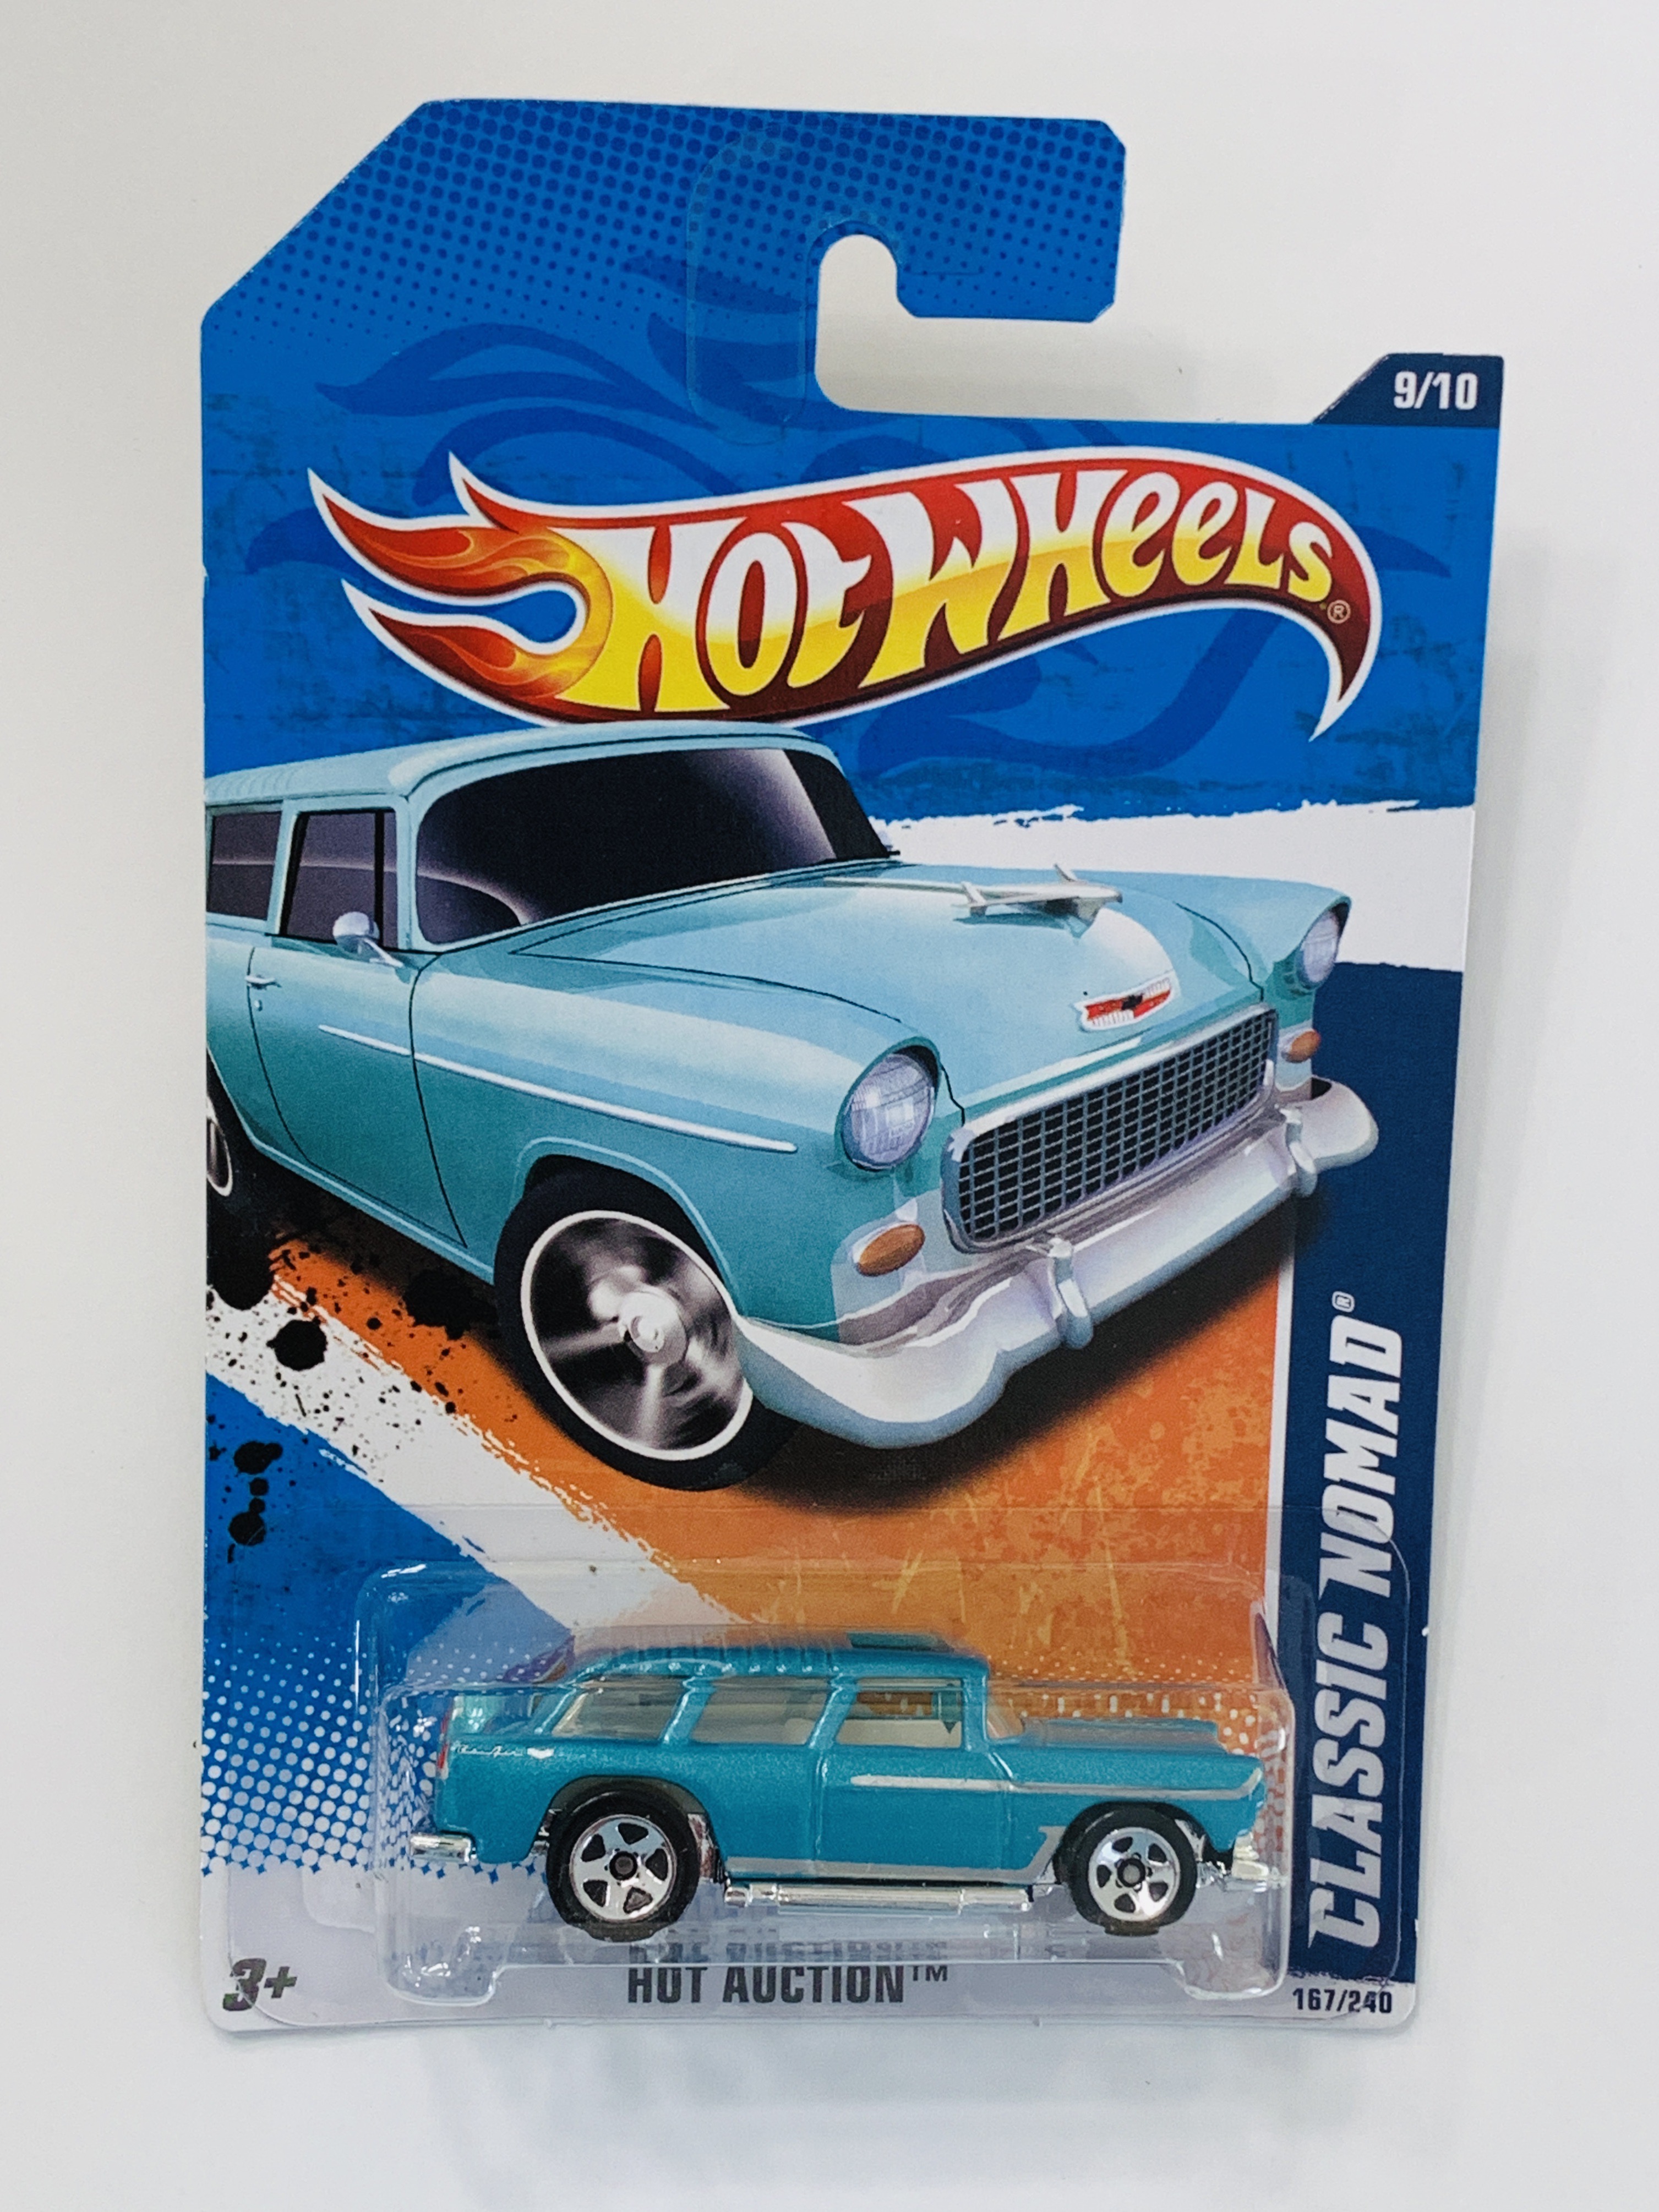 Hot Wheels #167 Classic Nomad - Kmart Exclusive